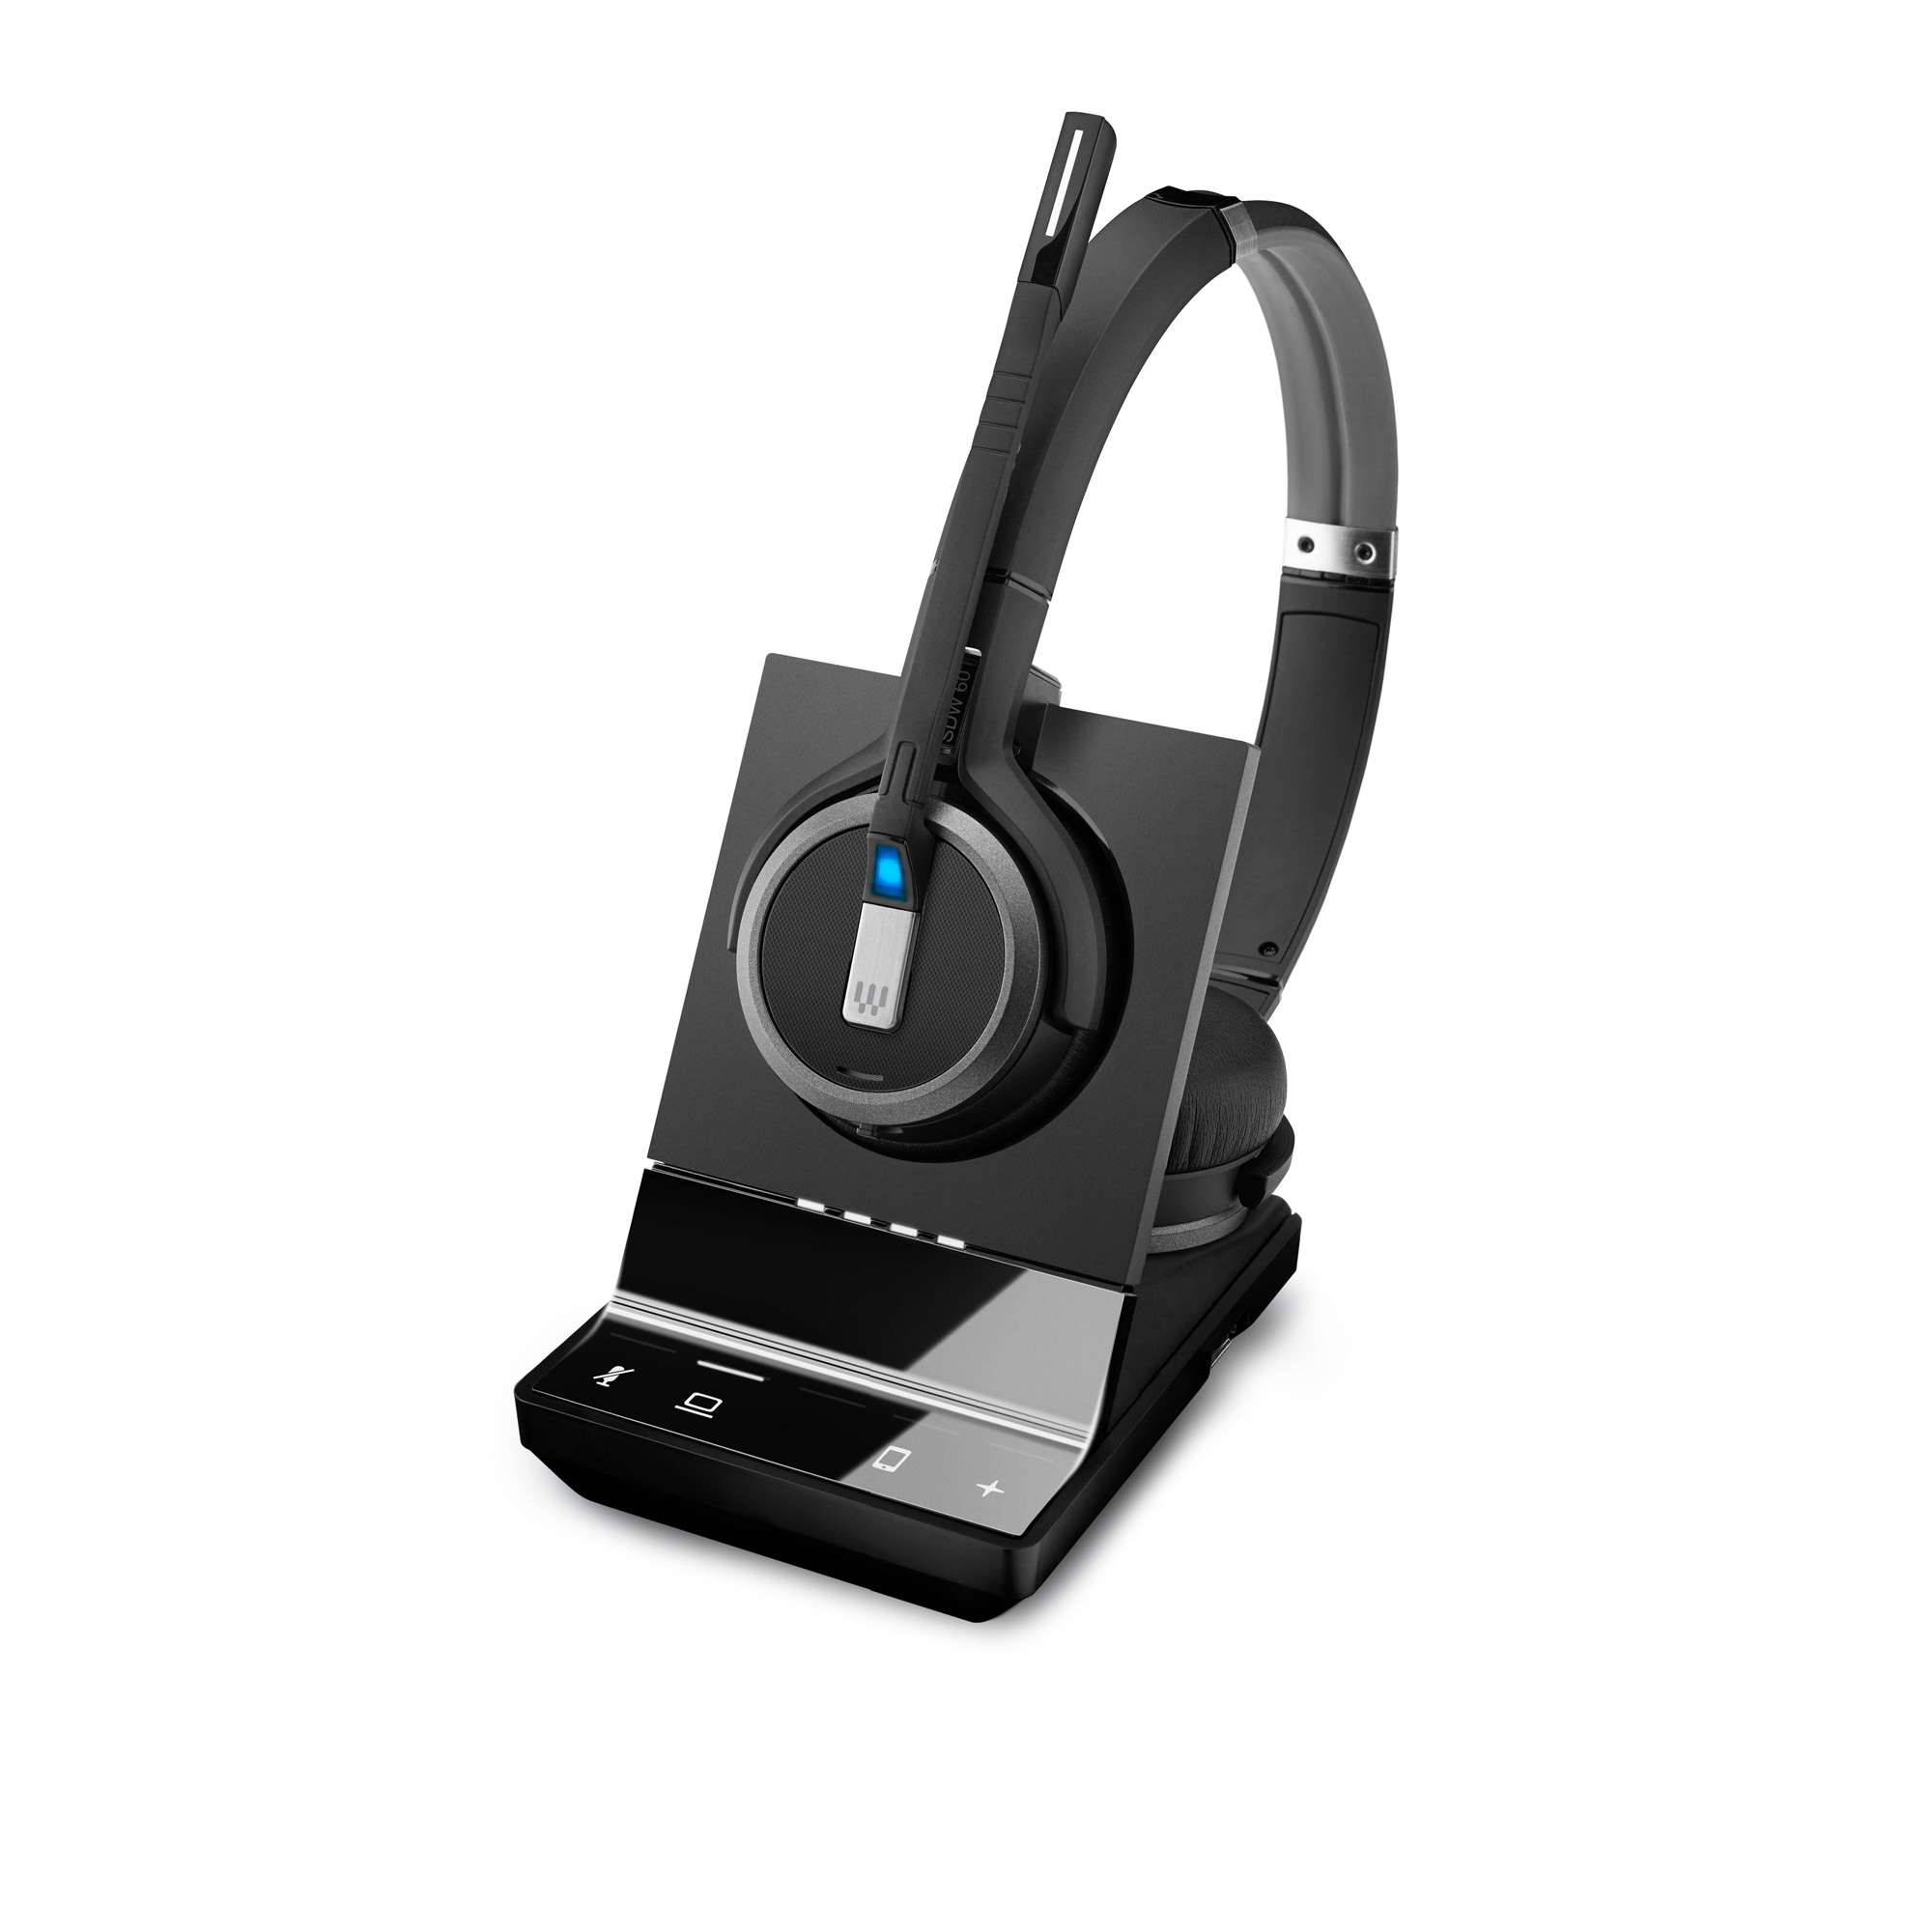 EP-506586 Double-sided, wireless DECT headset for professionals using PC/softphone. Super wideband audio, noise-cancelling system and stereo sound offer a superior audio solution.